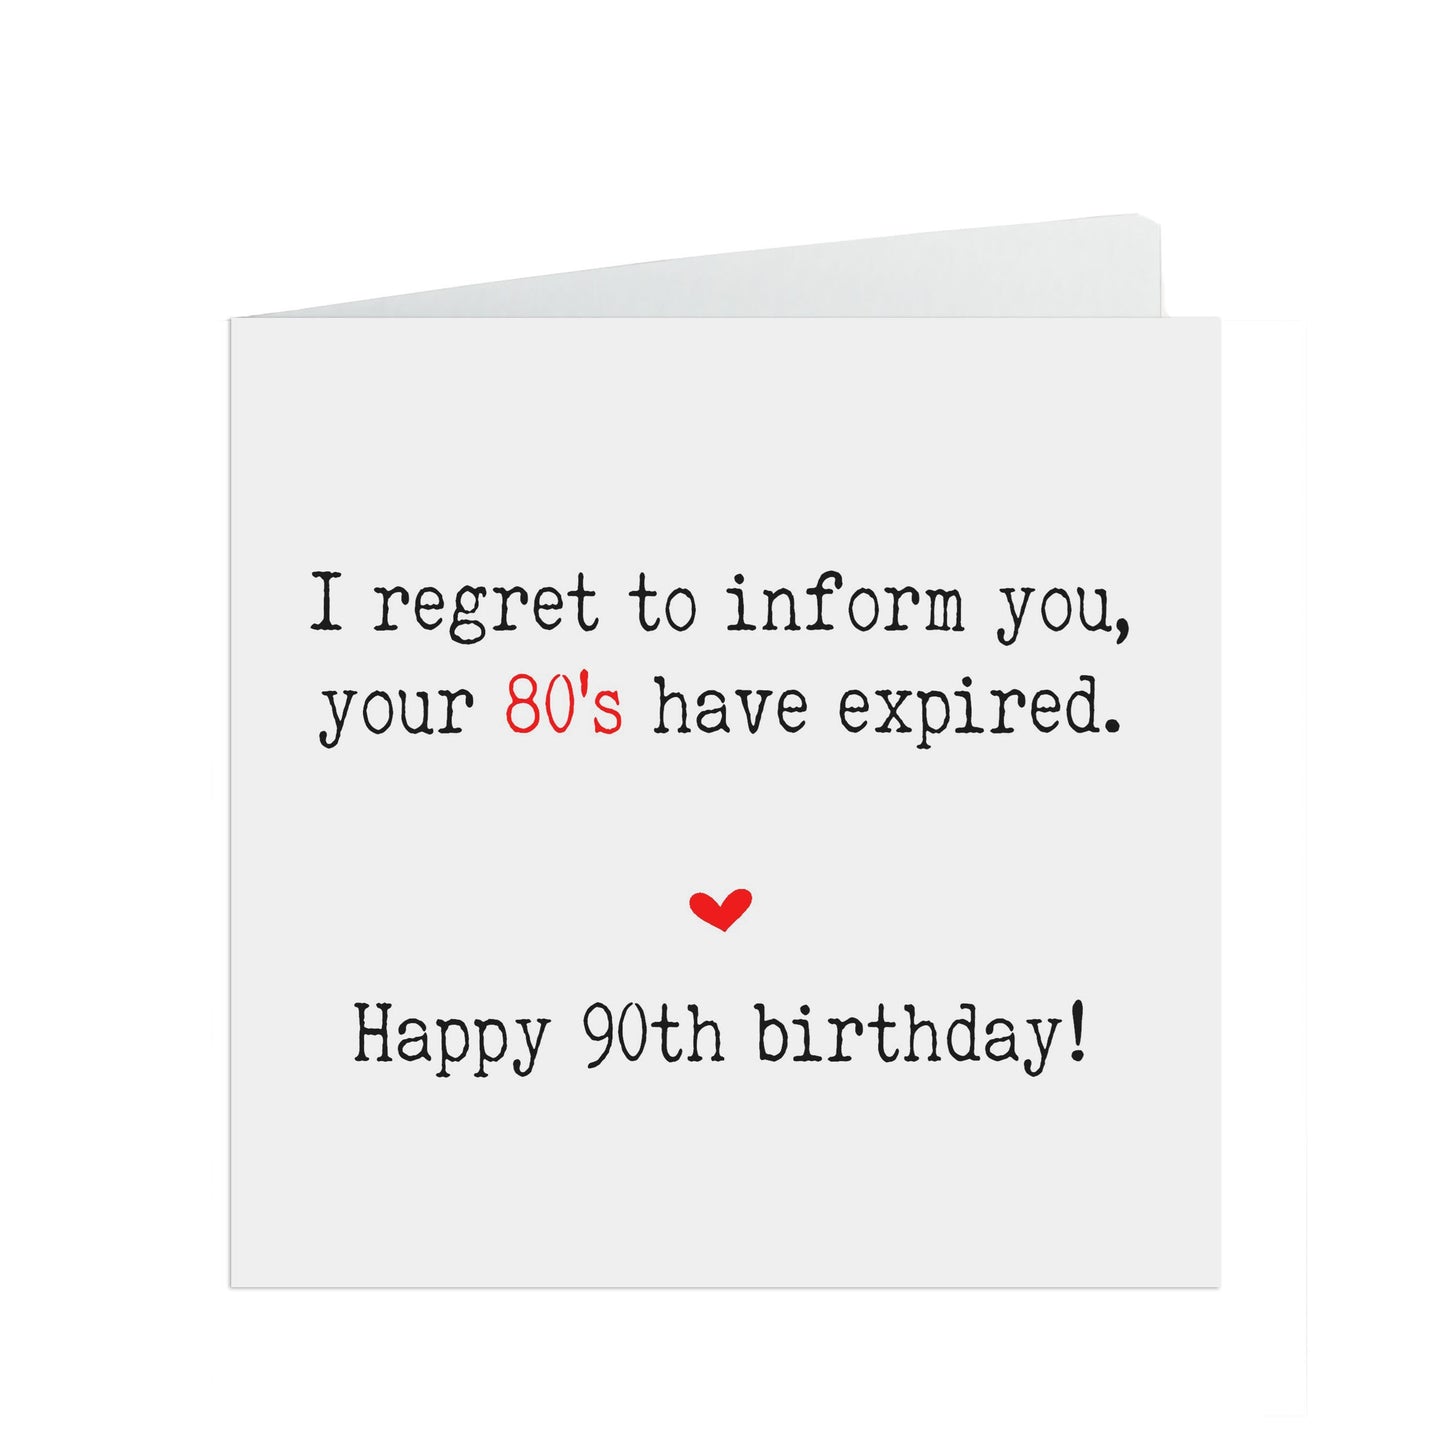 Funny 90th Birthday Card, Your 80's Have Expired